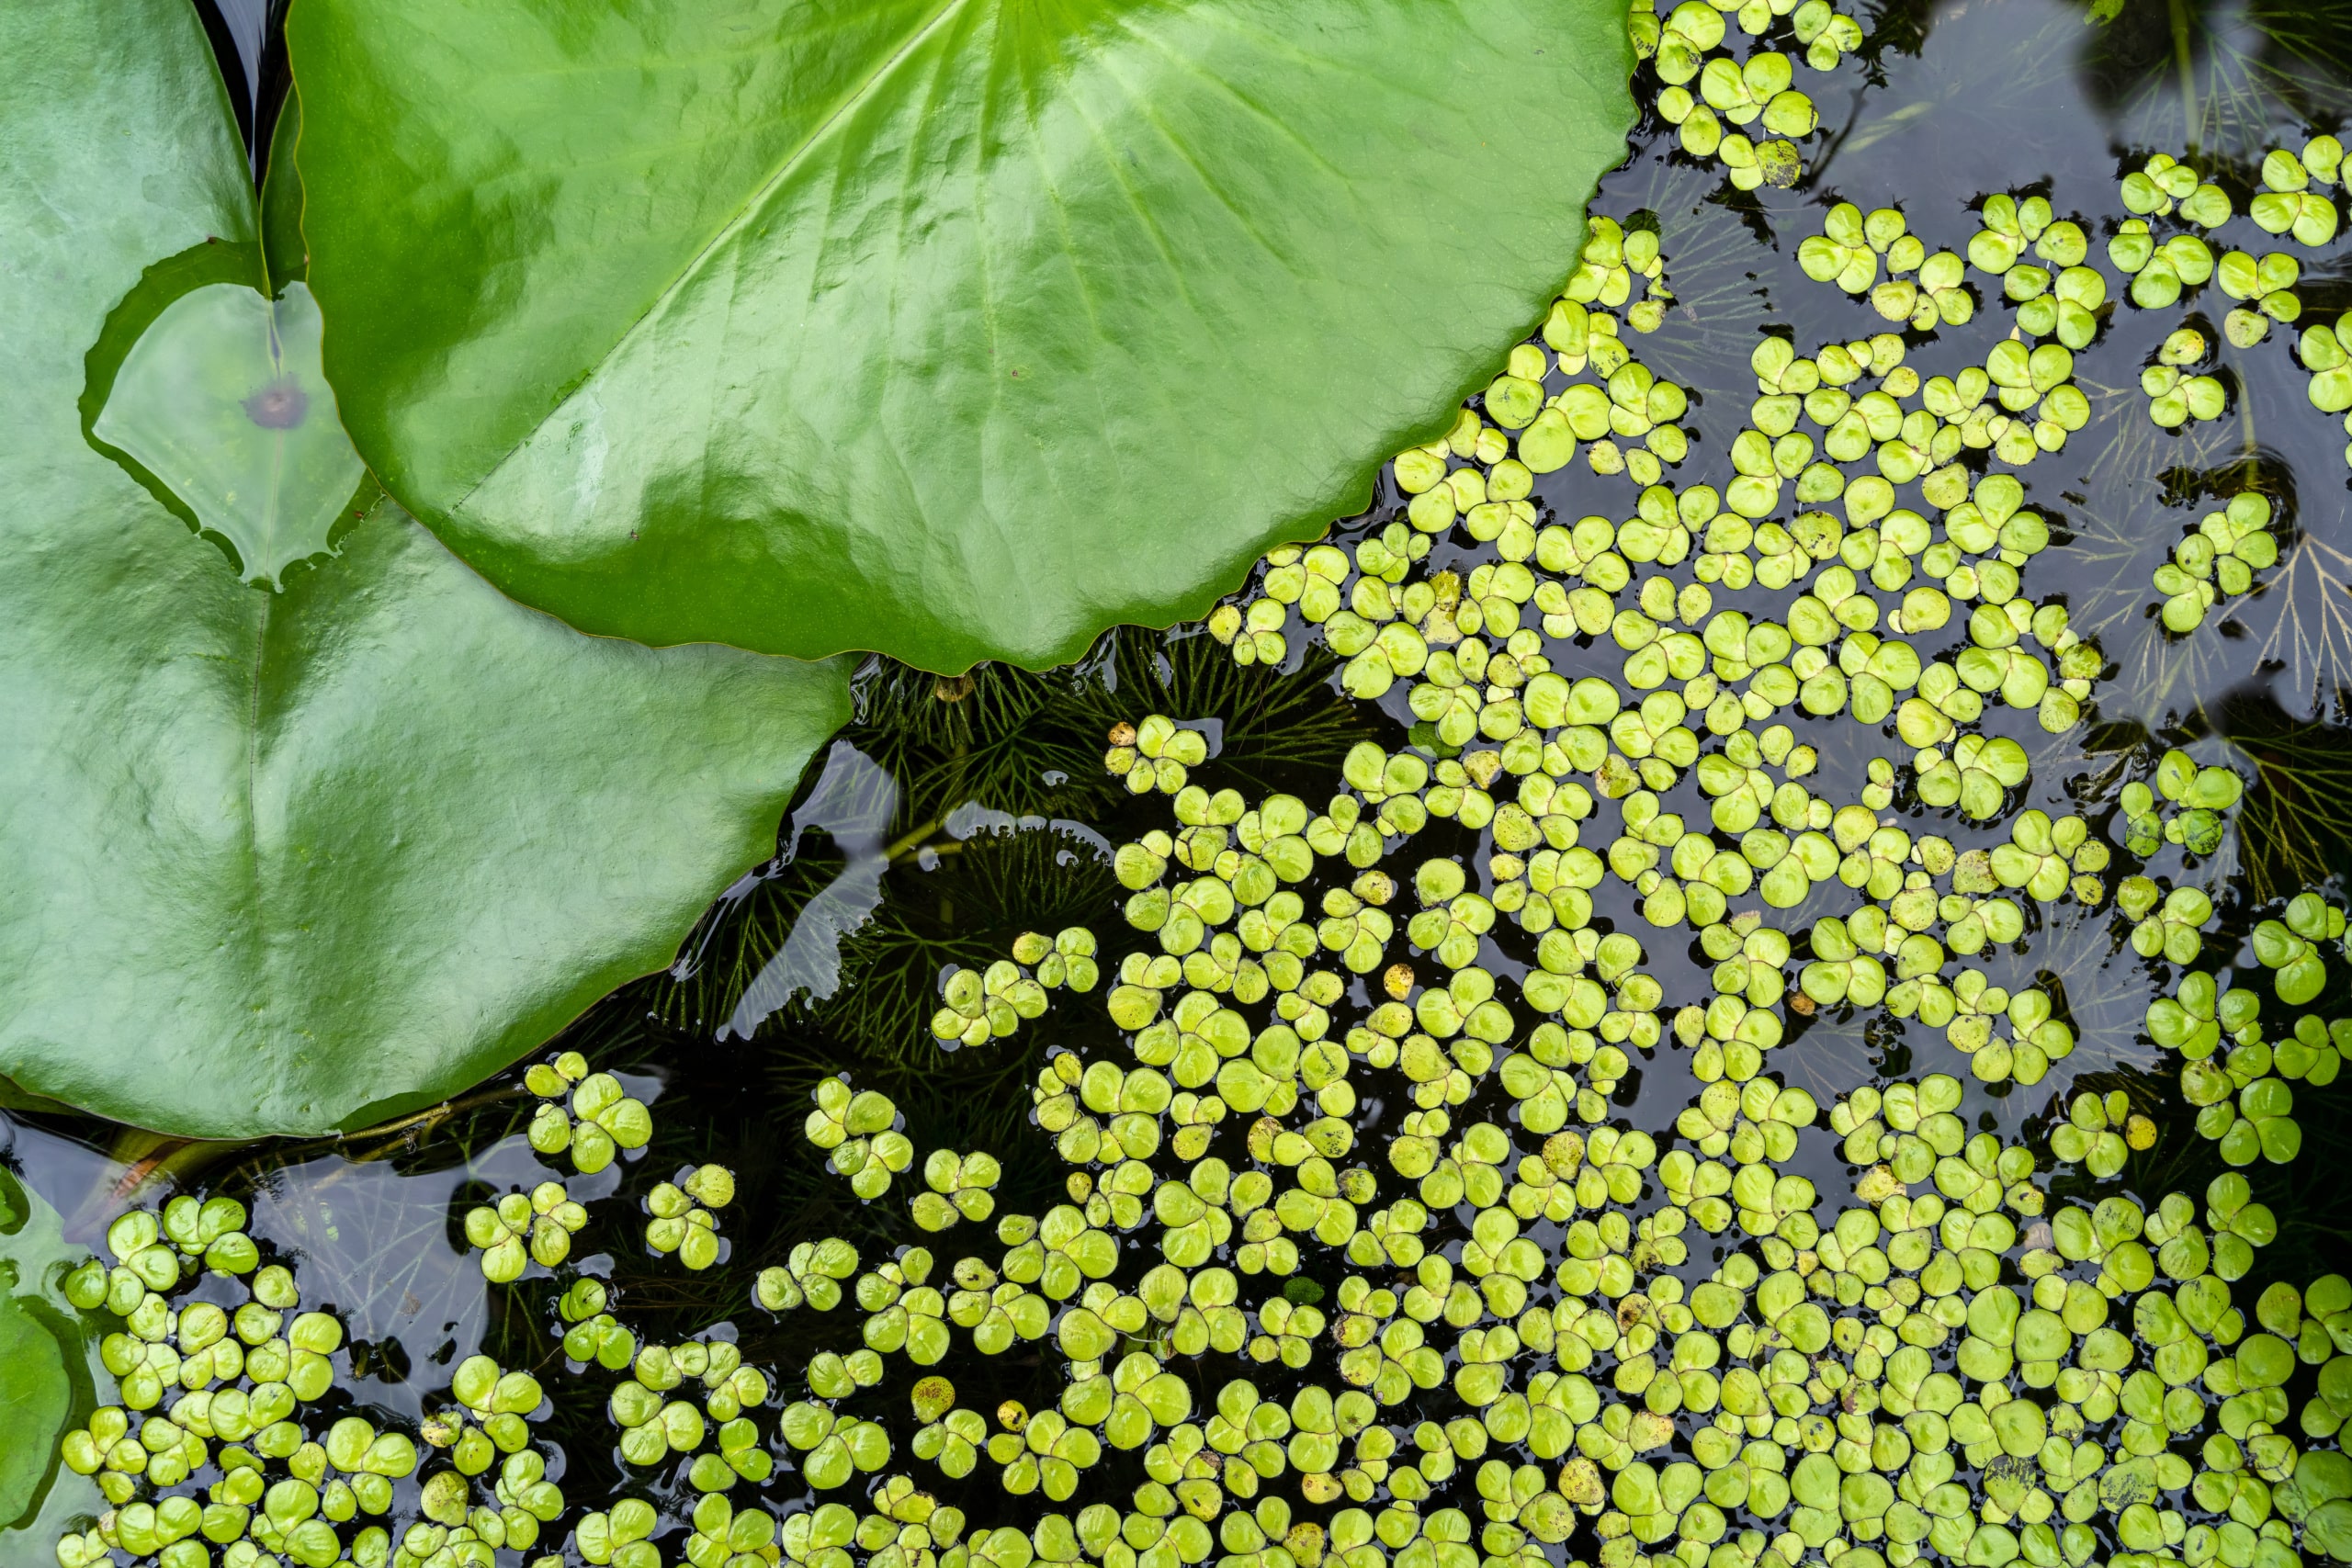 Duckweed floating in pond